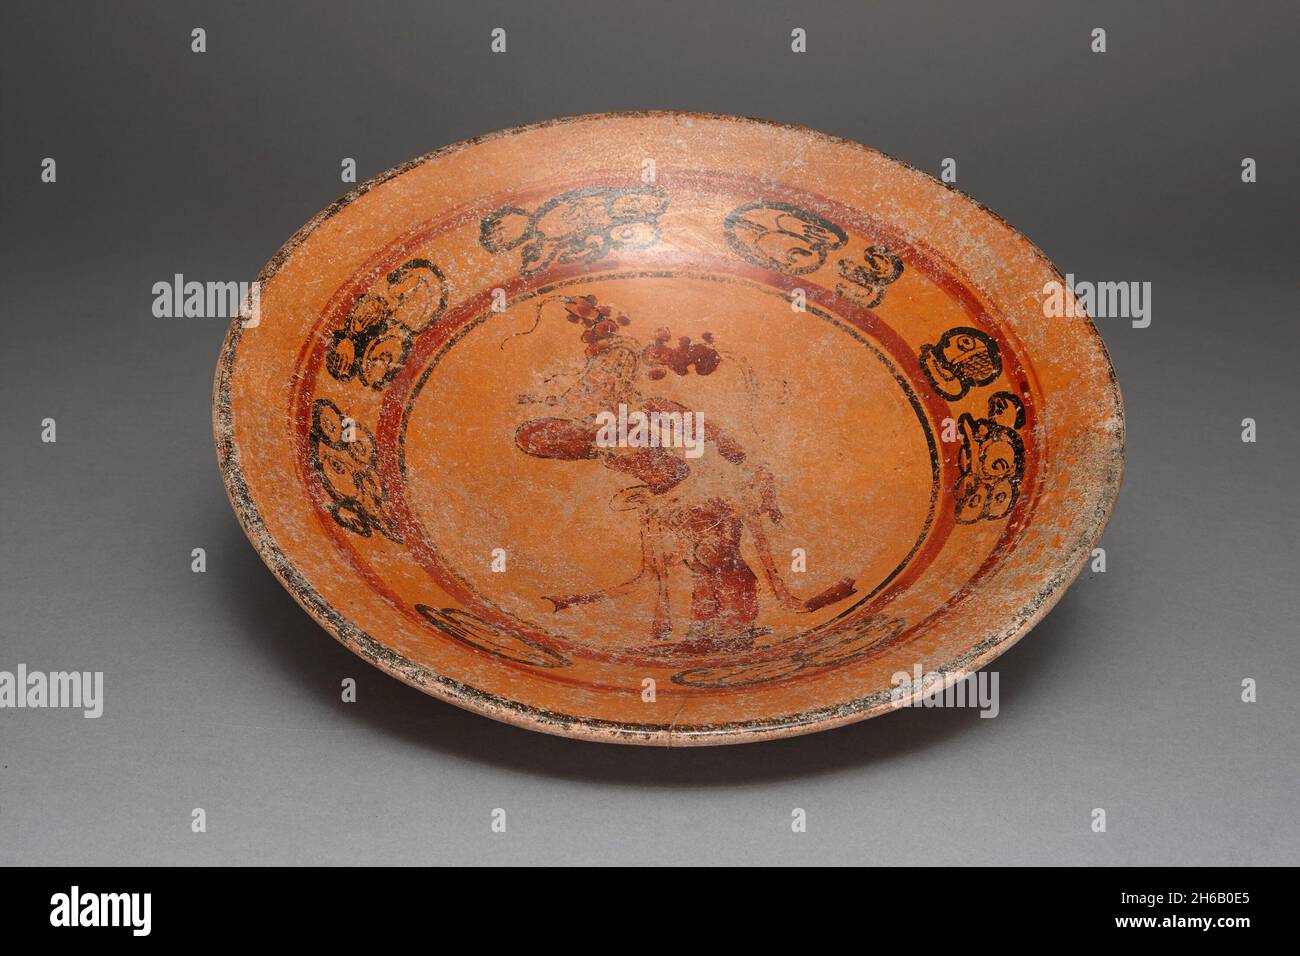 Plate Depicting a Dancing Figure, A.D. 600/800. Stock Photo